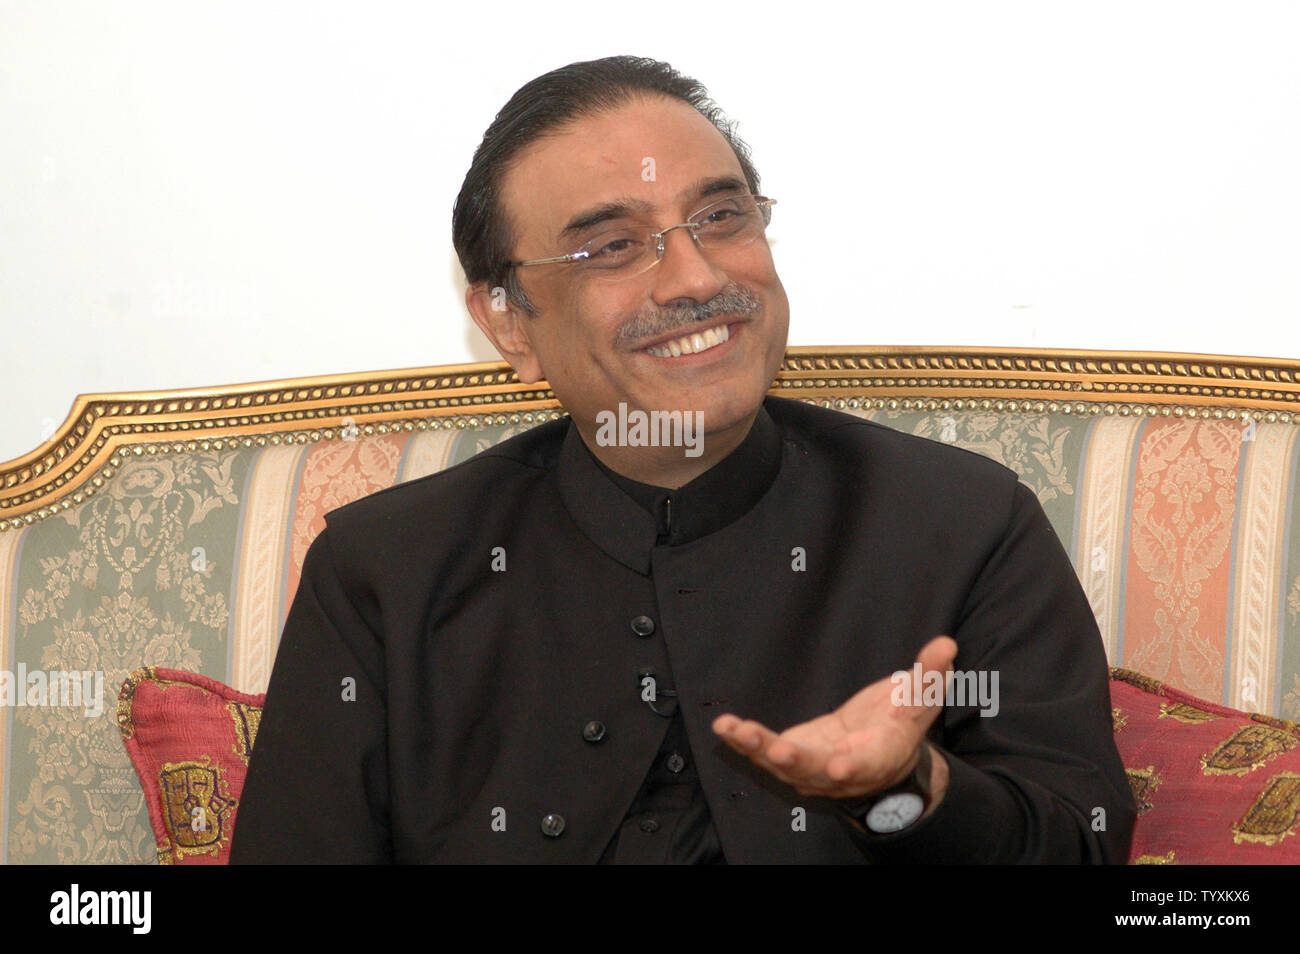 Asif Ali Zardari (shown in March, 2008 file photo), became Pakistan's new president after being elected by parliament on Saturday, September 6, 2008.  Zardari, 53,  the widower of former Prime Minister Benazir Bhutto, succeeds Gen. Pervez Musharraf, who was forced to resign last month under the threat of impeachment. He spent 11 years in jail on corruption charges that were not proven, and is seen as strongly pro-Western and supportive of U.S. efforts to battle militant Taliban extremists both in neighboring Afghanistan as well as in Pakistan itself.  (UPI Photo/Sajjad Ali Qureshi/Files) Stock Photo